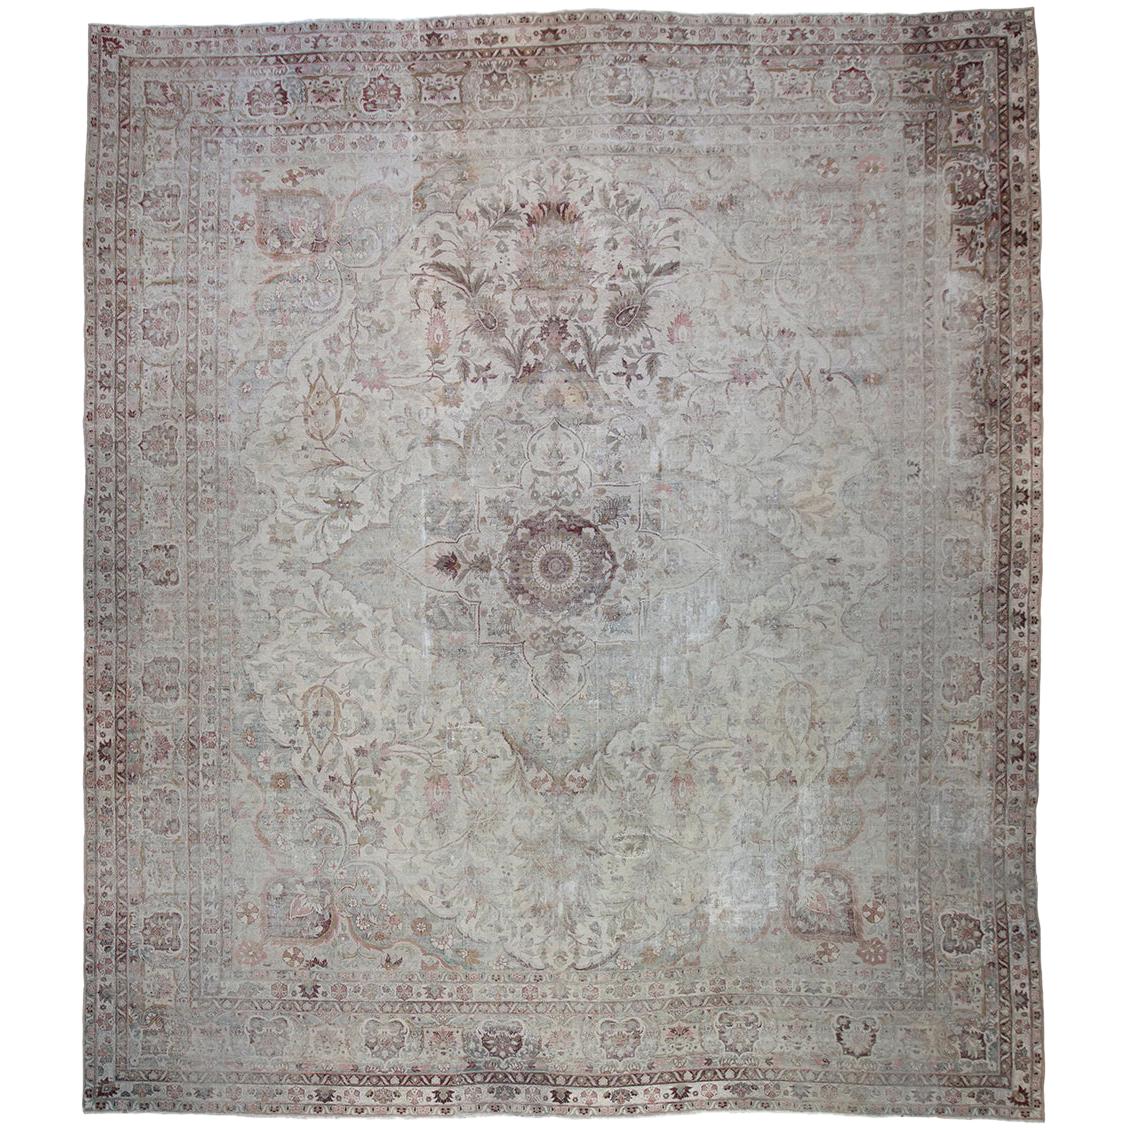 Giant Amritsar Carpet with Wear 'DK-113-99'